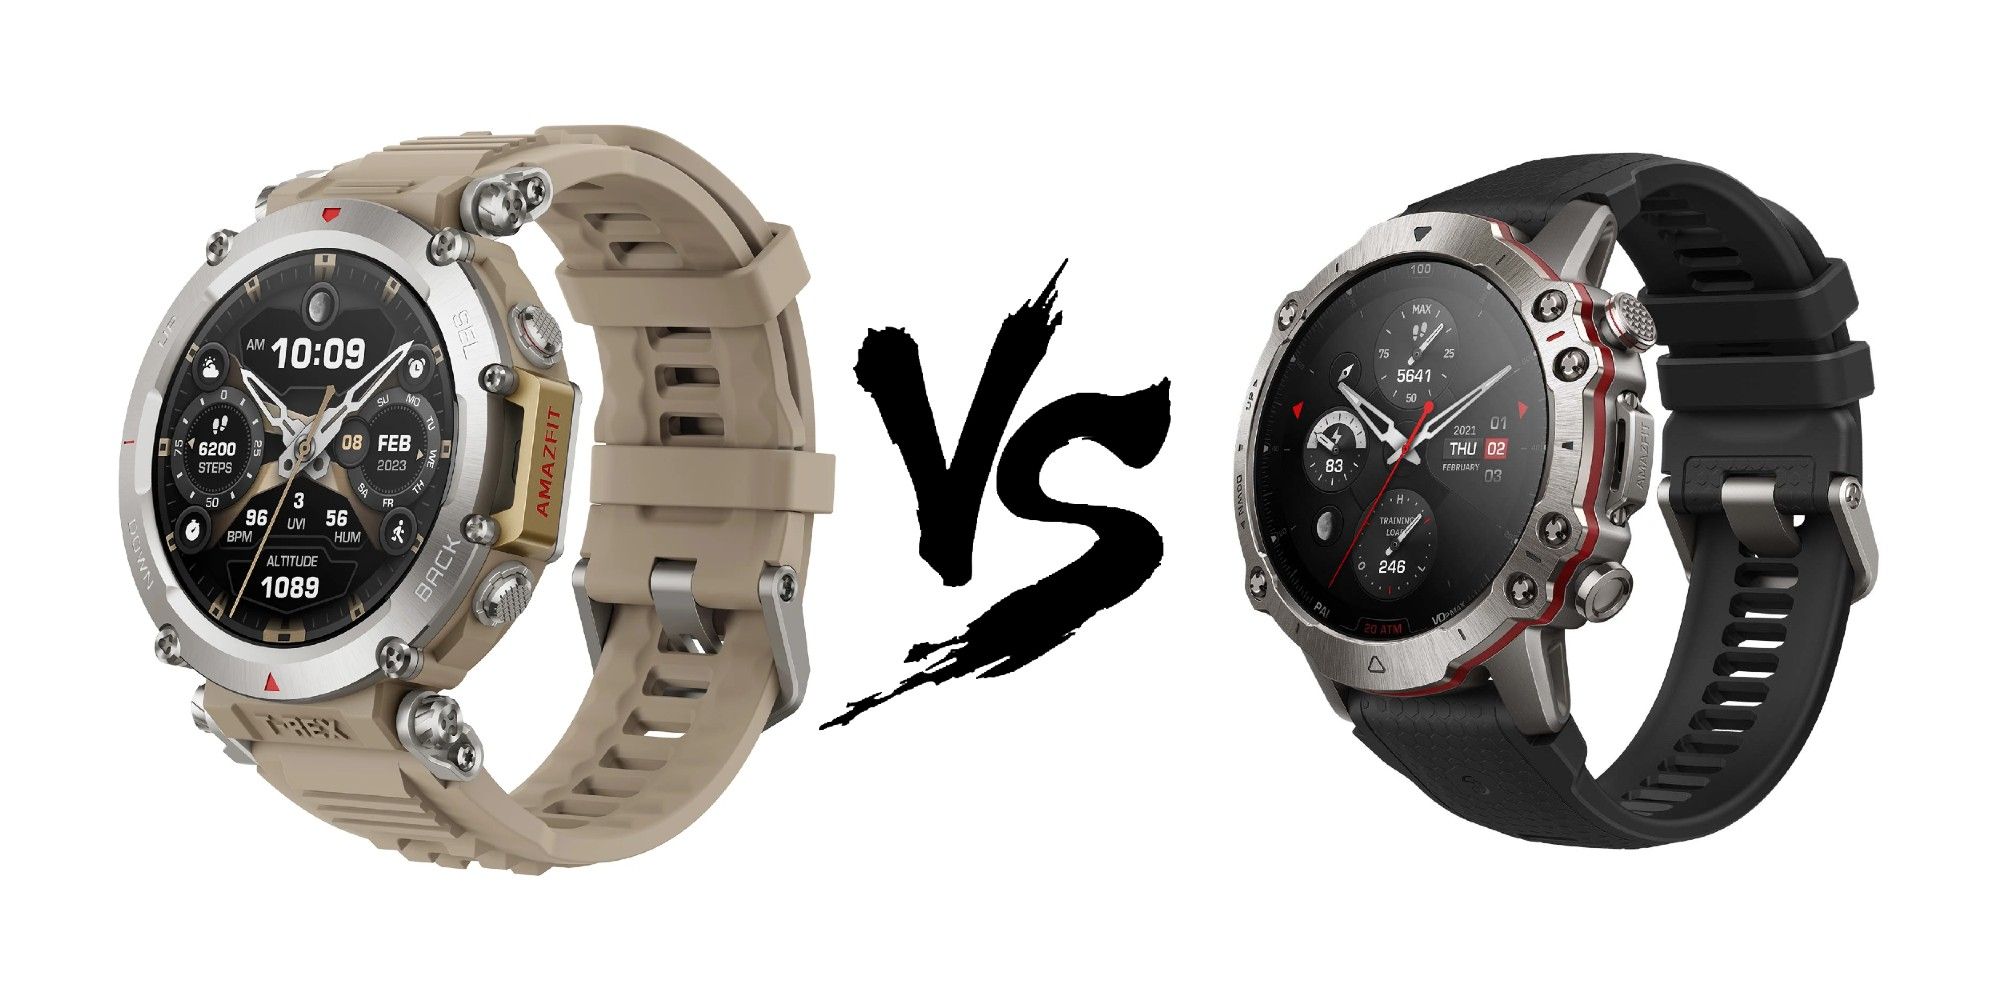 A photo showing the Amazfit T-Rex Ultra and the Amazfit Falcon